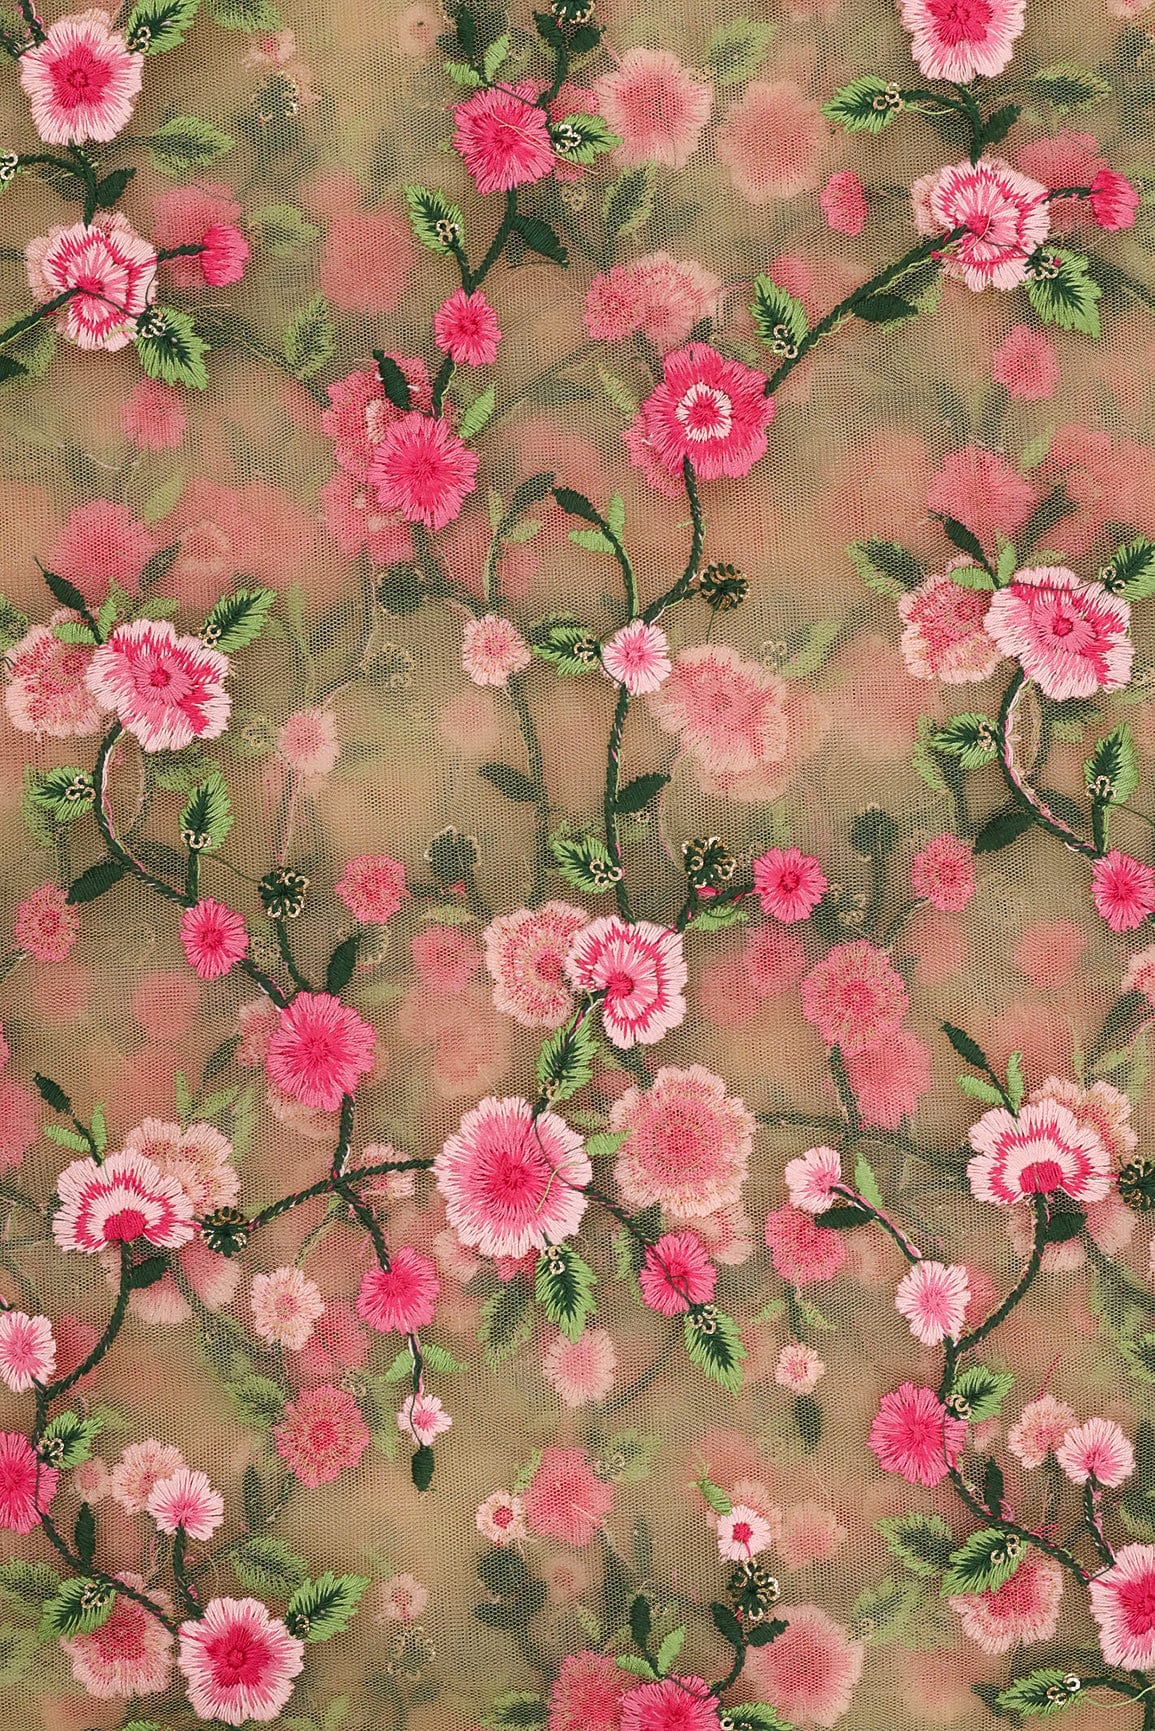 doeraa Embroidery Fabrics Pink and Green Floral Embroidery on Beige Soft Net Fabric